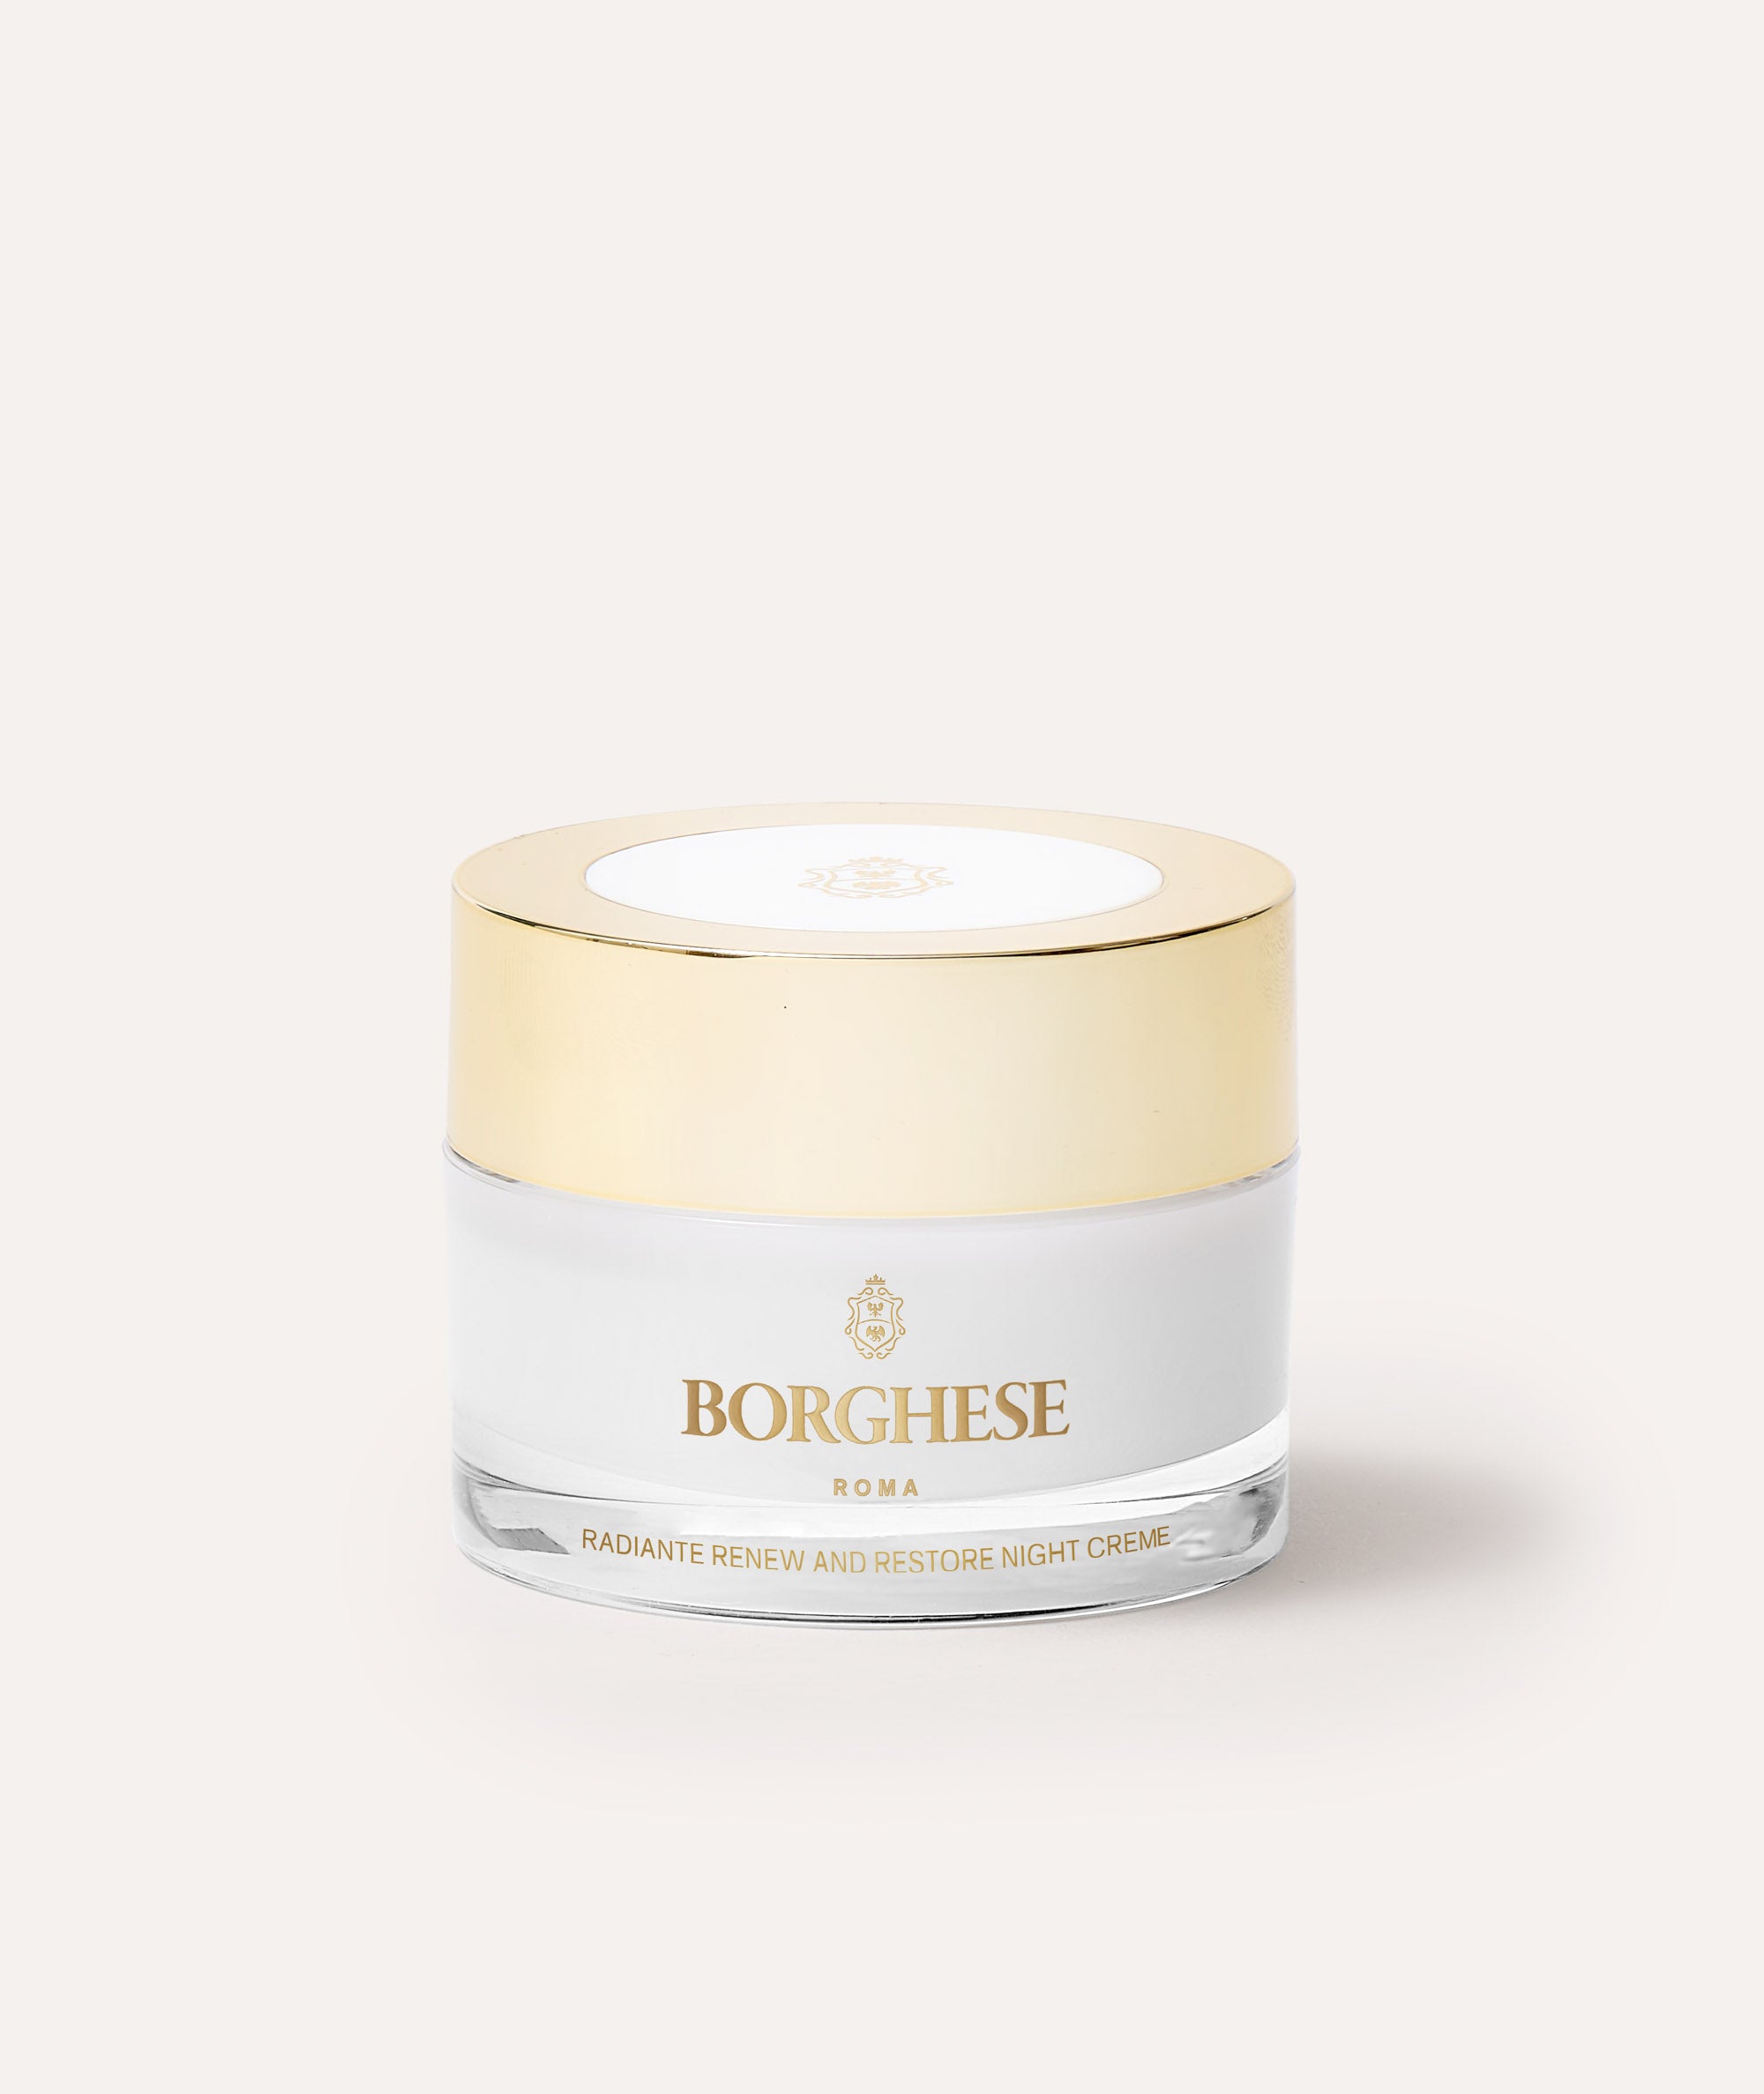 This is a picture of the Radiante Renew and Restore Night Creme in a white jar